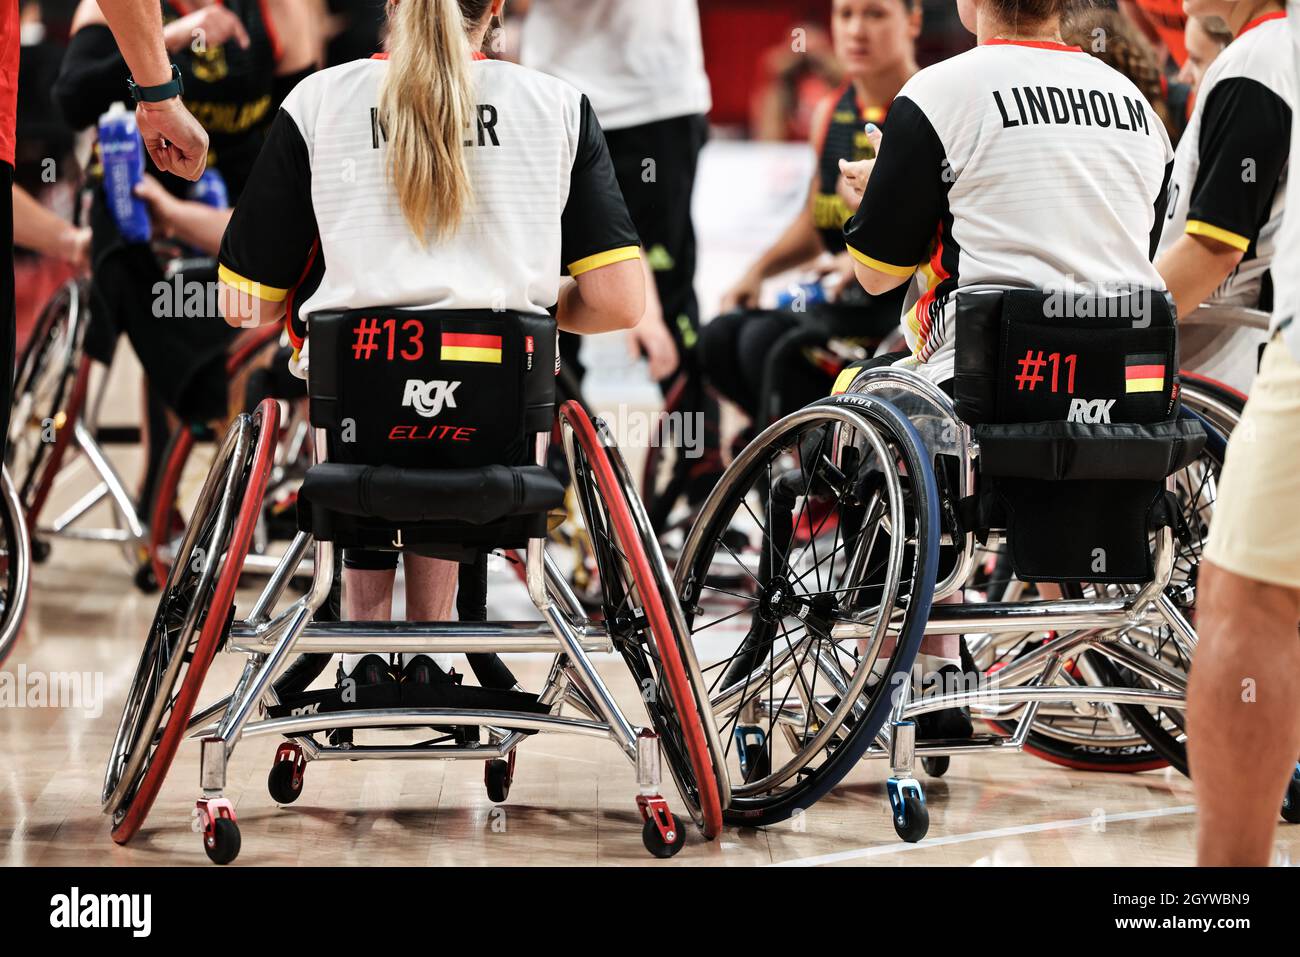 Tokyo, Giappone. 2021 agosto 29. Weman's Wheelchair Basketball: Germania vs Giappone a Tokyo paralimpic games 2020. Dettagli sedie a rotelle Foto Stock